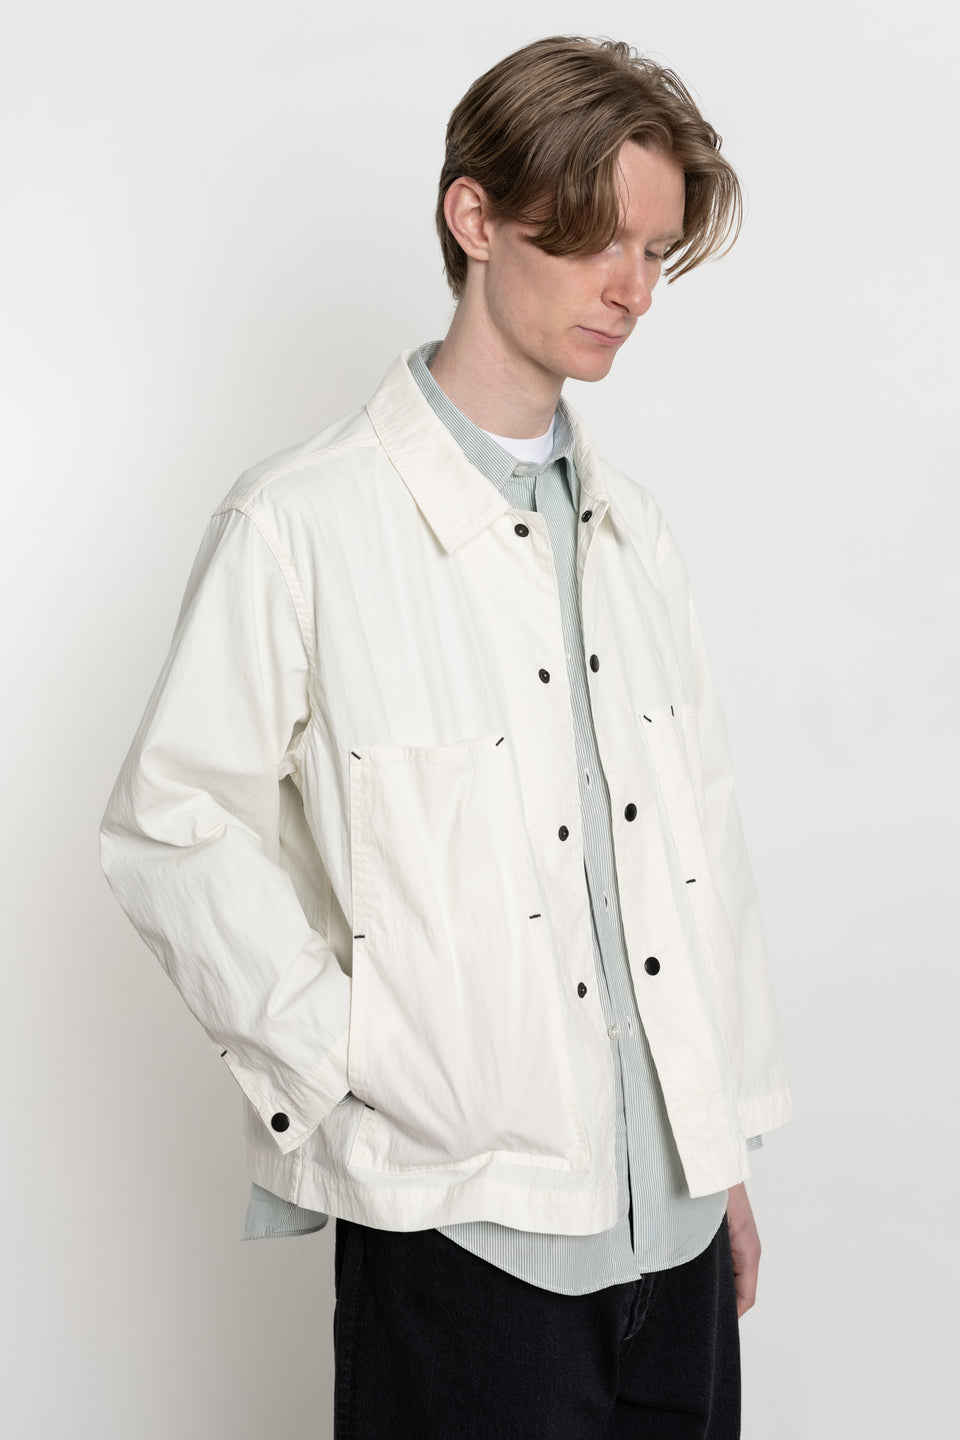 ENDS and MEANS spring summer 2024 SS24 24SS Men's Collection from Japan cover all jacket off white